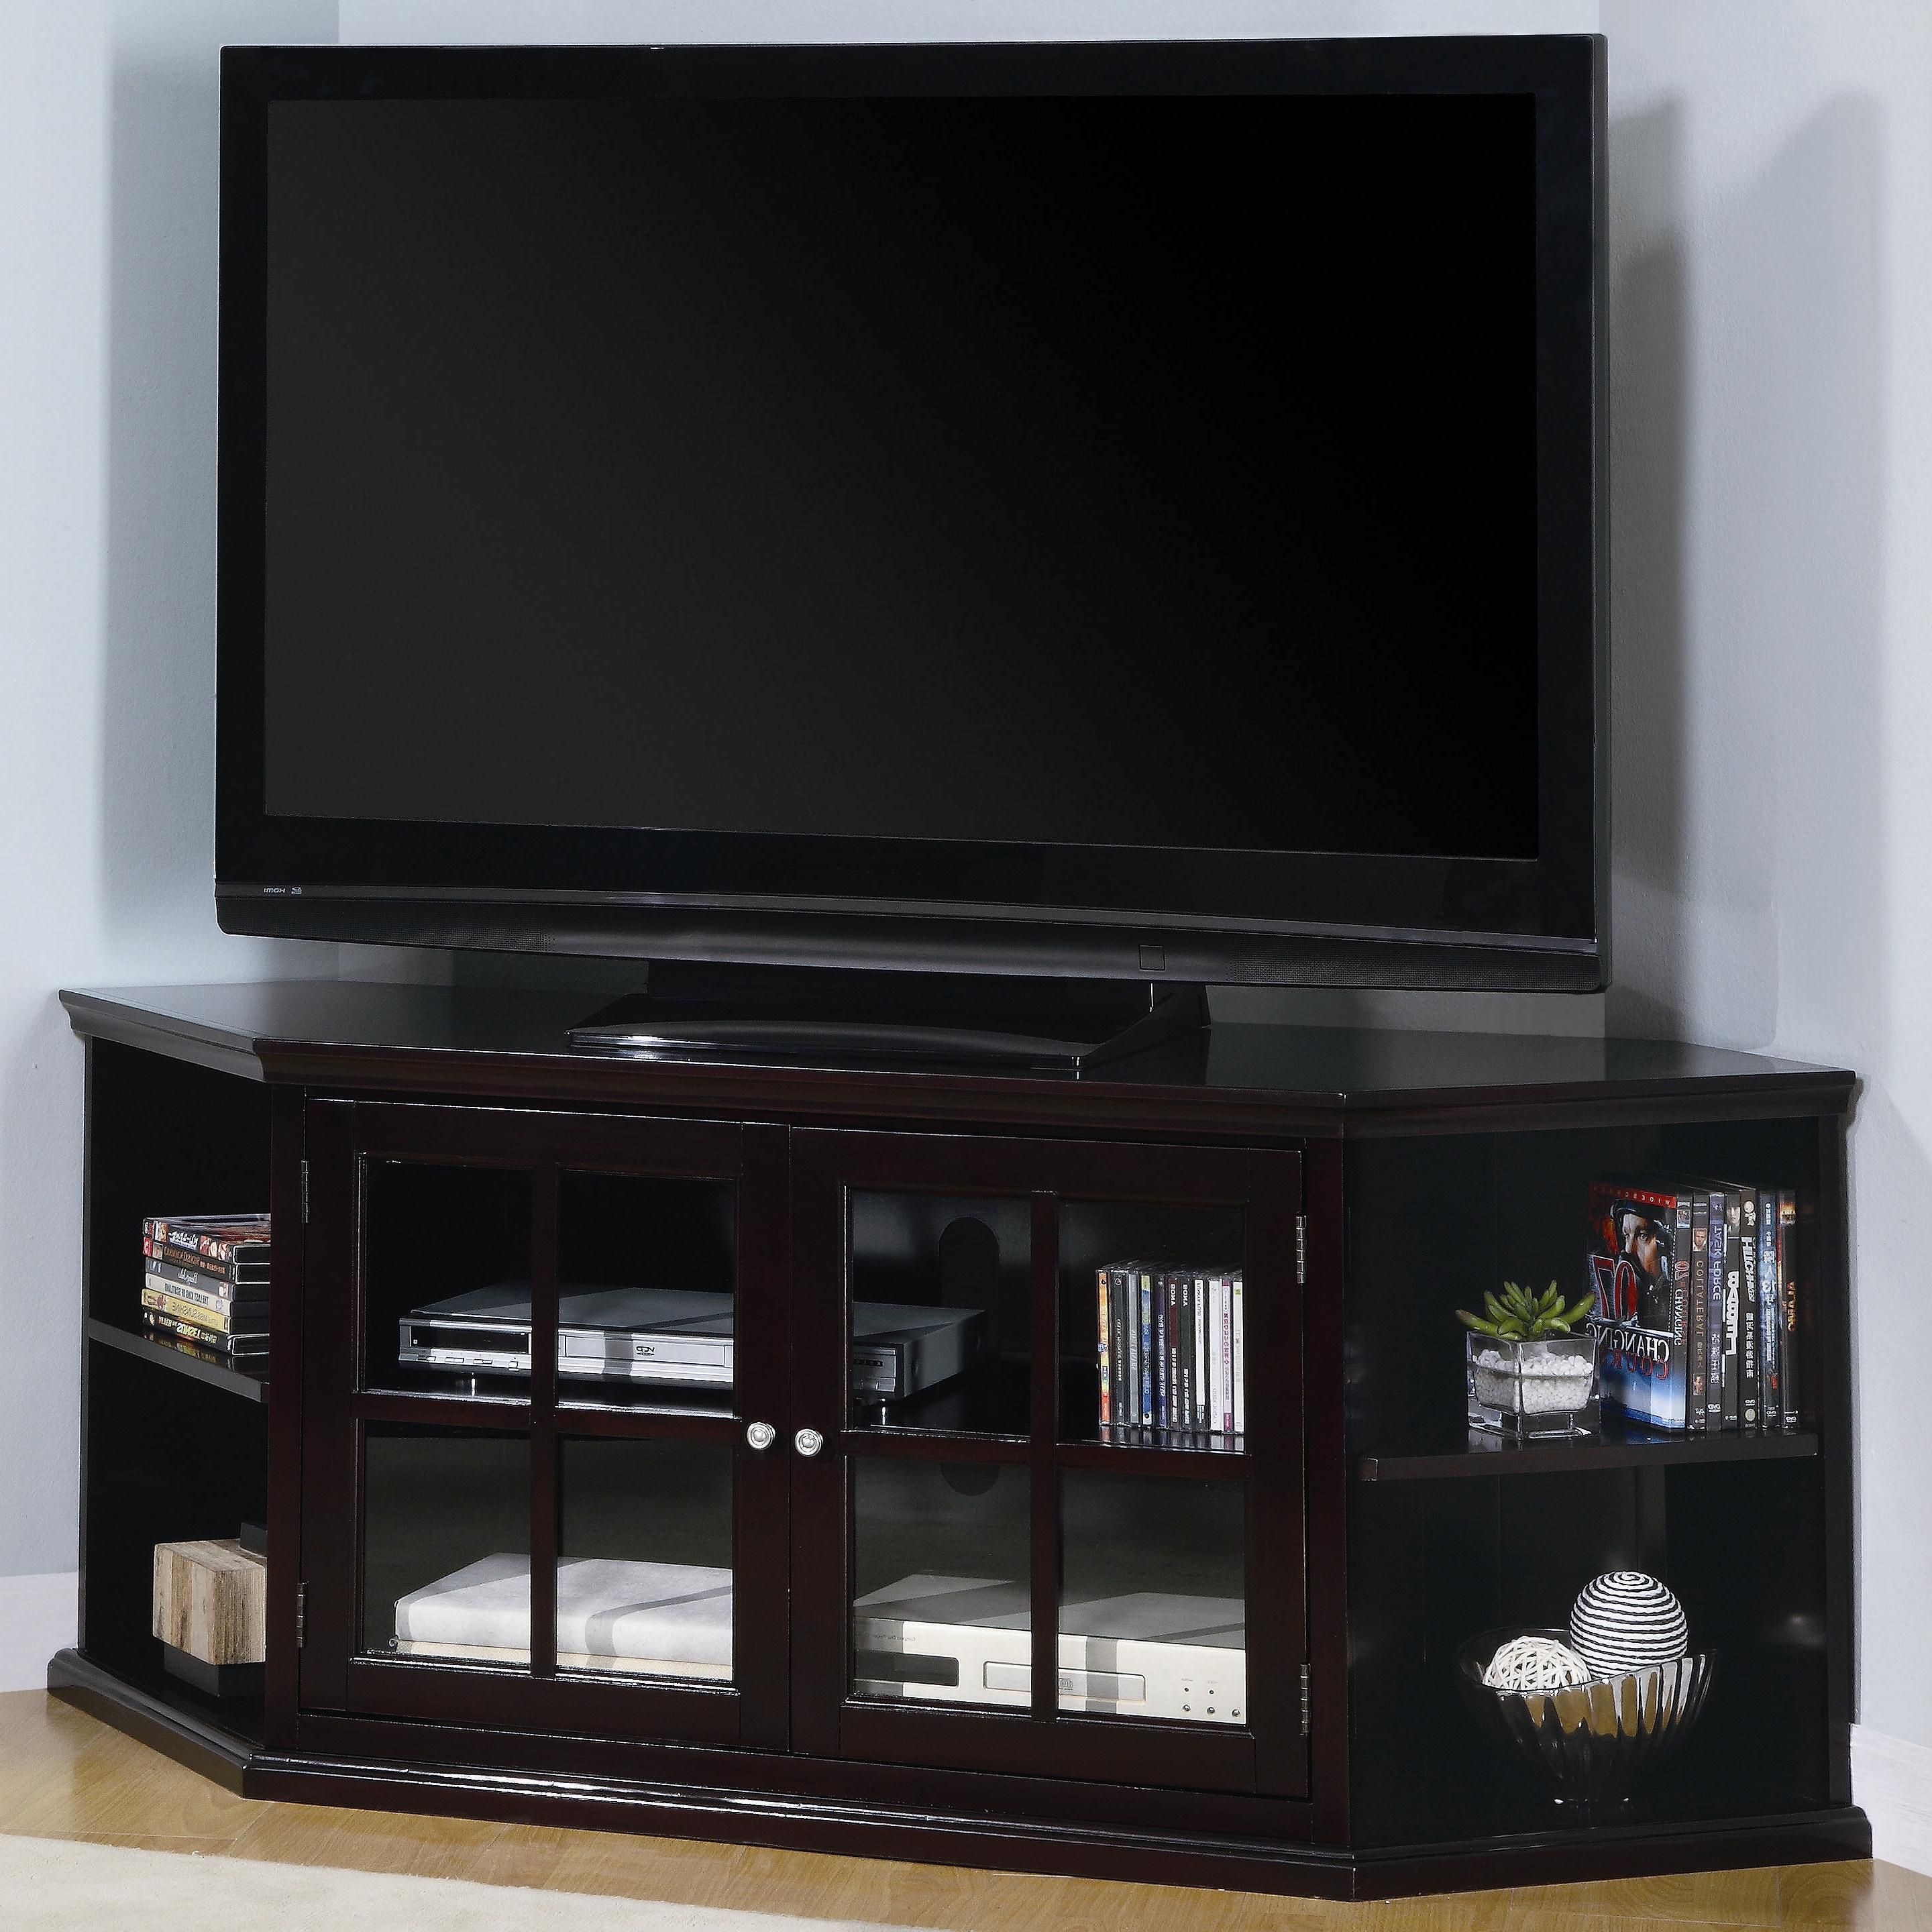 Well Known Tv Cabinets With Glass Doors Regarding Coaster Fullerton Transitional Corner Media Unit With Glass Doors (View 4 of 20)